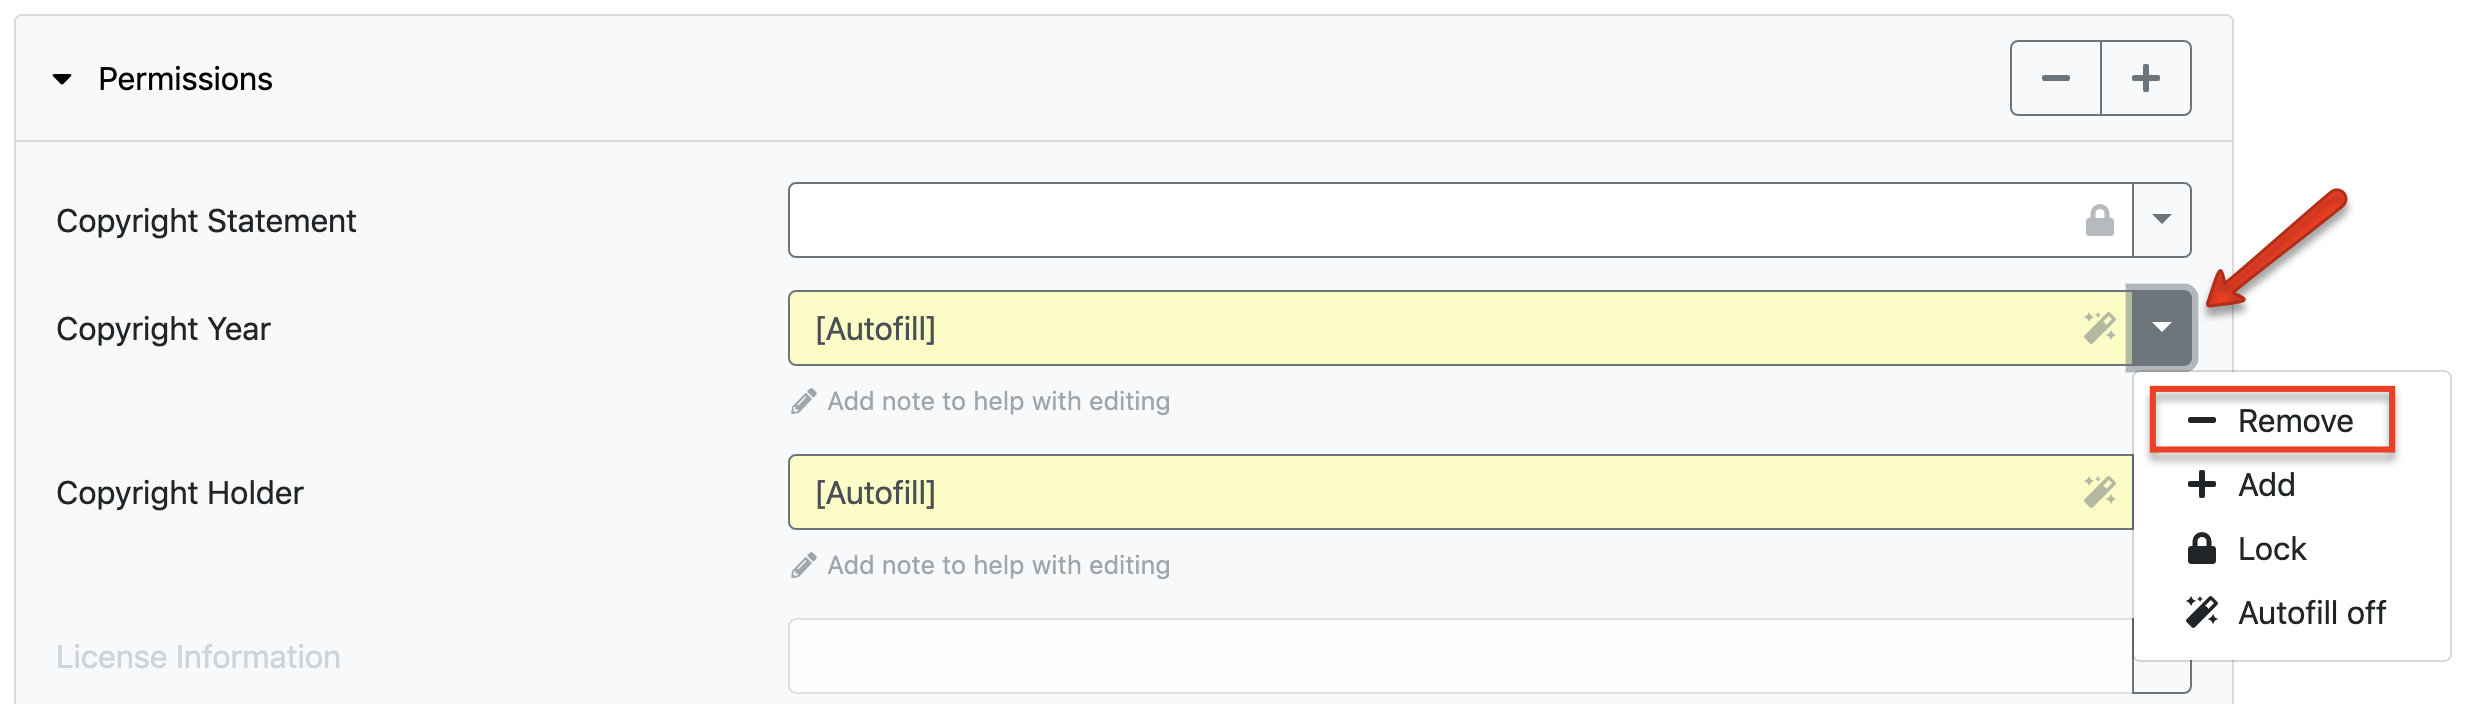 Screenshot of selecting the dropdown arrow icon next to the metadata field and selecting Remove